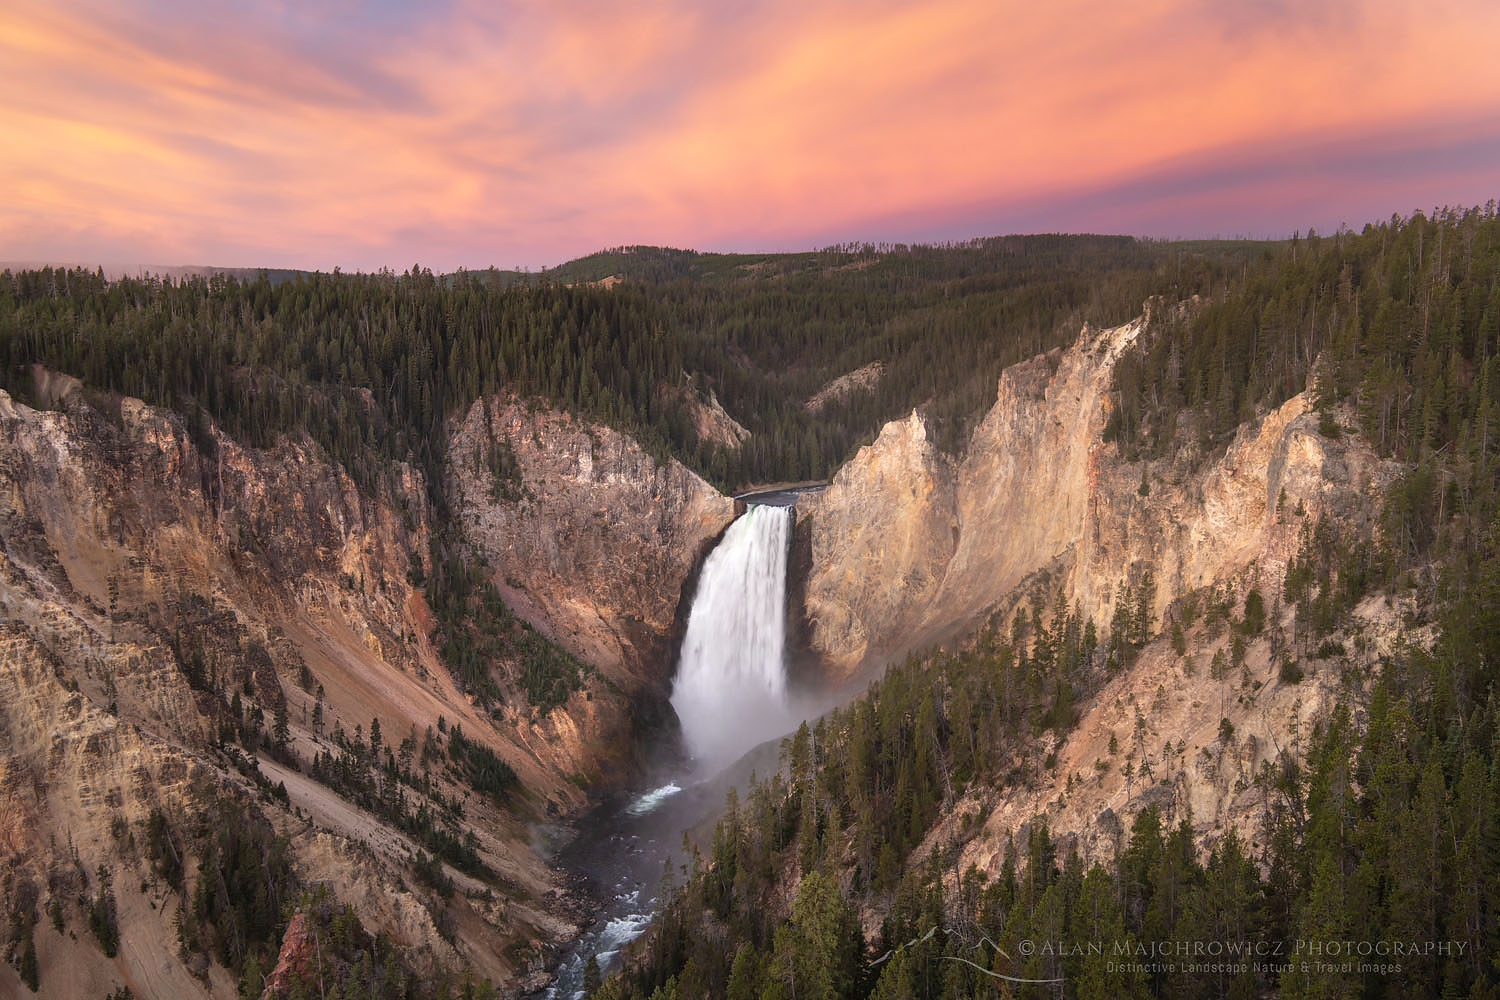 Sunrise over Lower Falls of the Yellowstone River seen from Lookout Point, Yellowstone National Park #67940